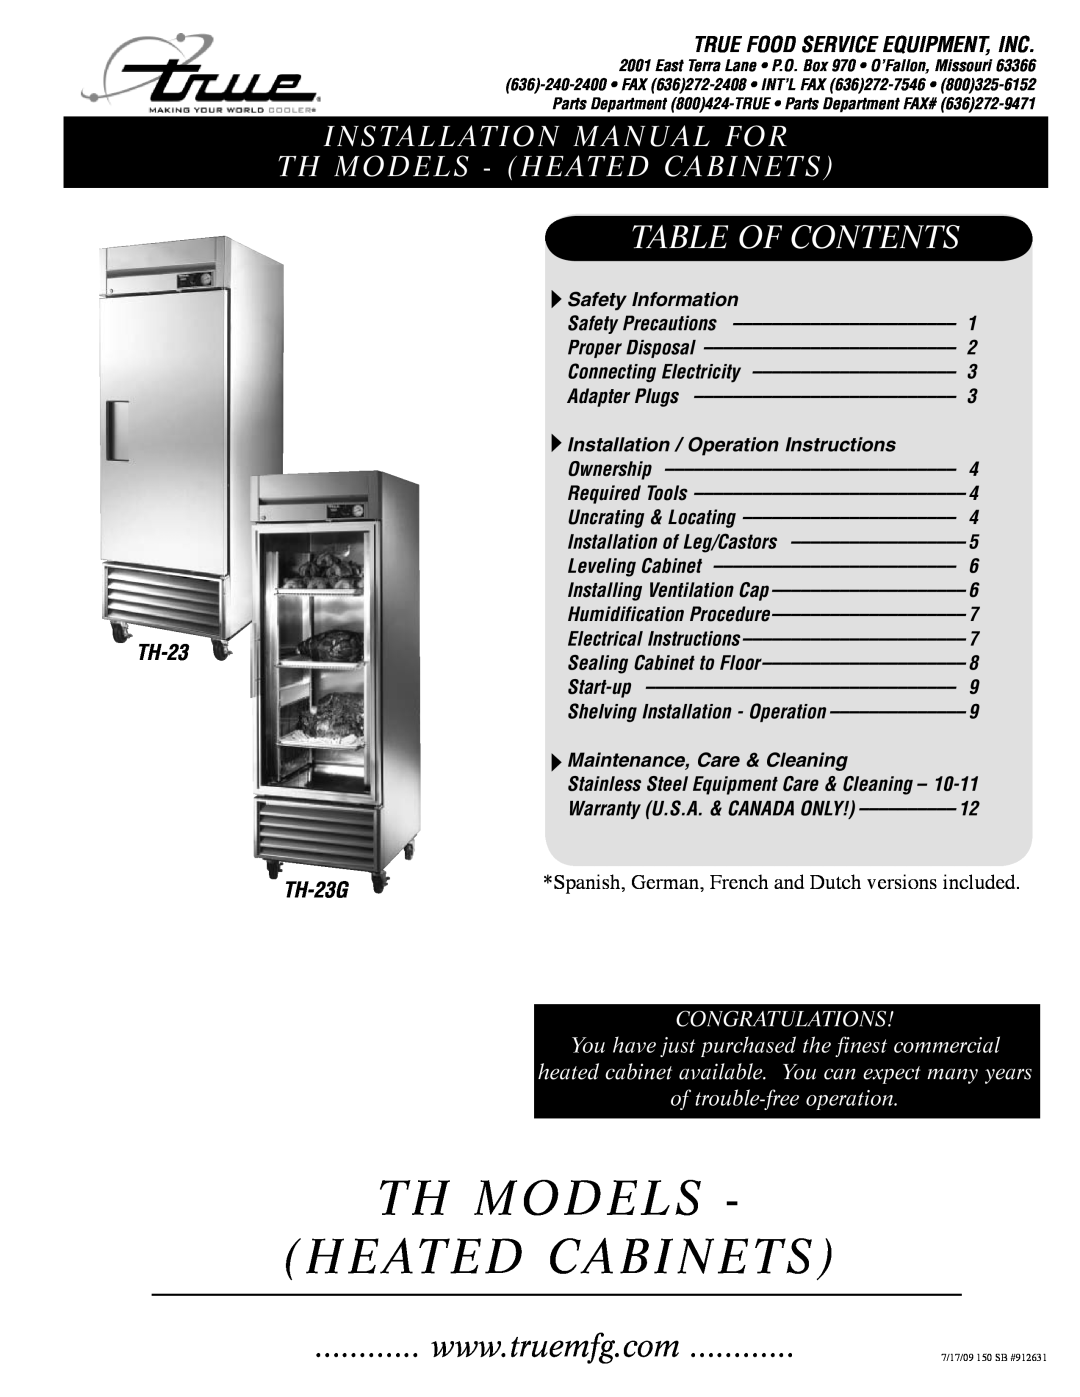 True Manufacturing Company TH-23G installation manual True Food Service Equipment, Inc, Th Models Heated Cabinets 